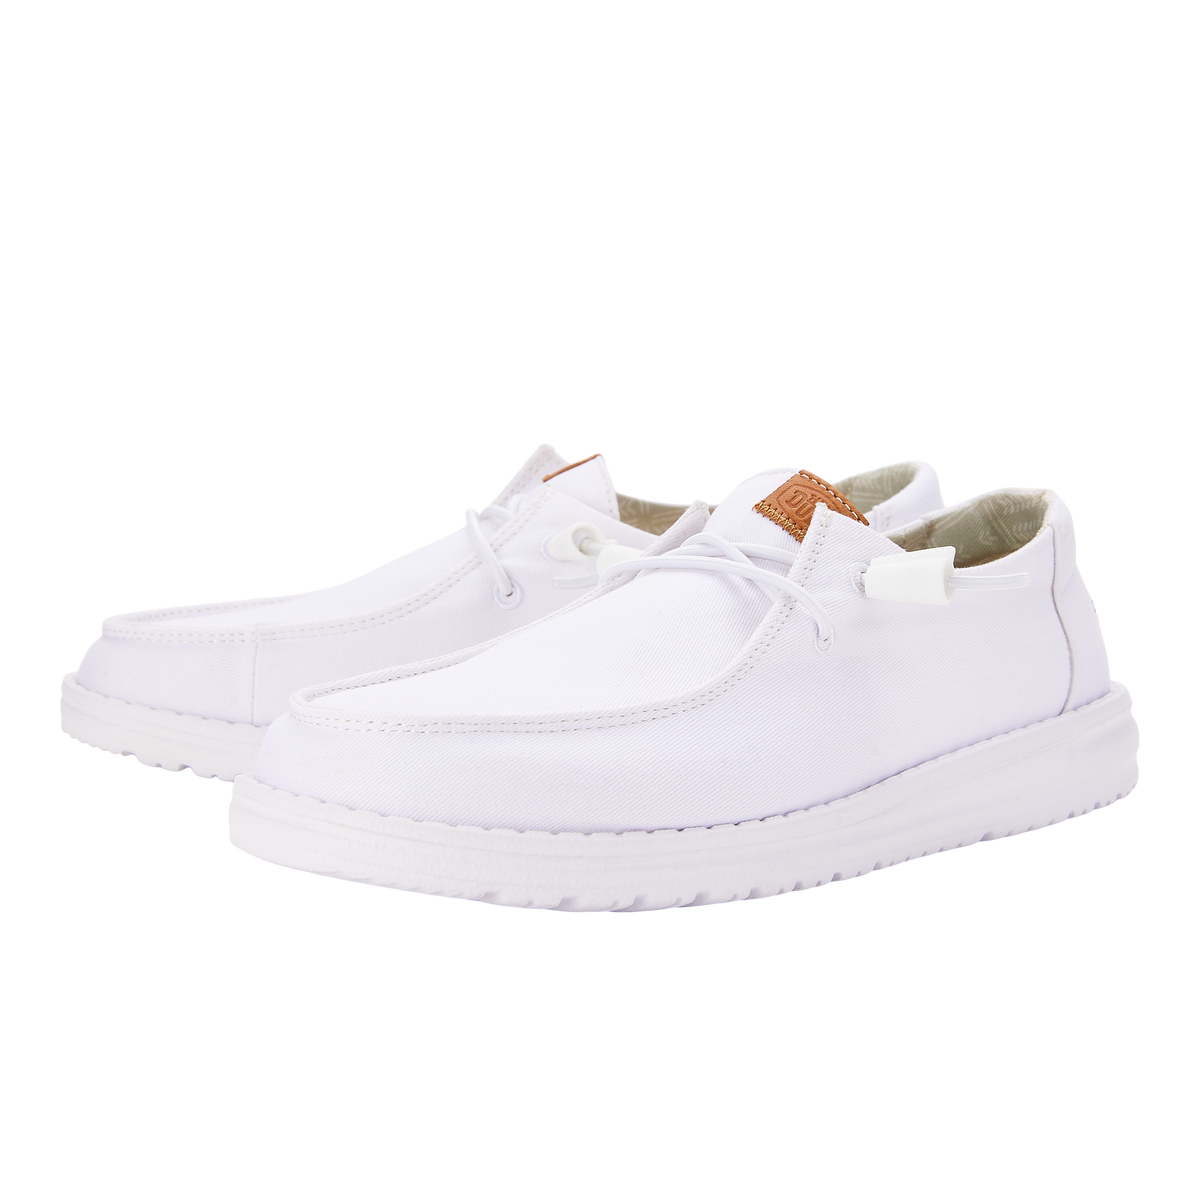 Wendy Stretch Canvas Wide White - Women's Casual Shoes | HEYDUDE shoes